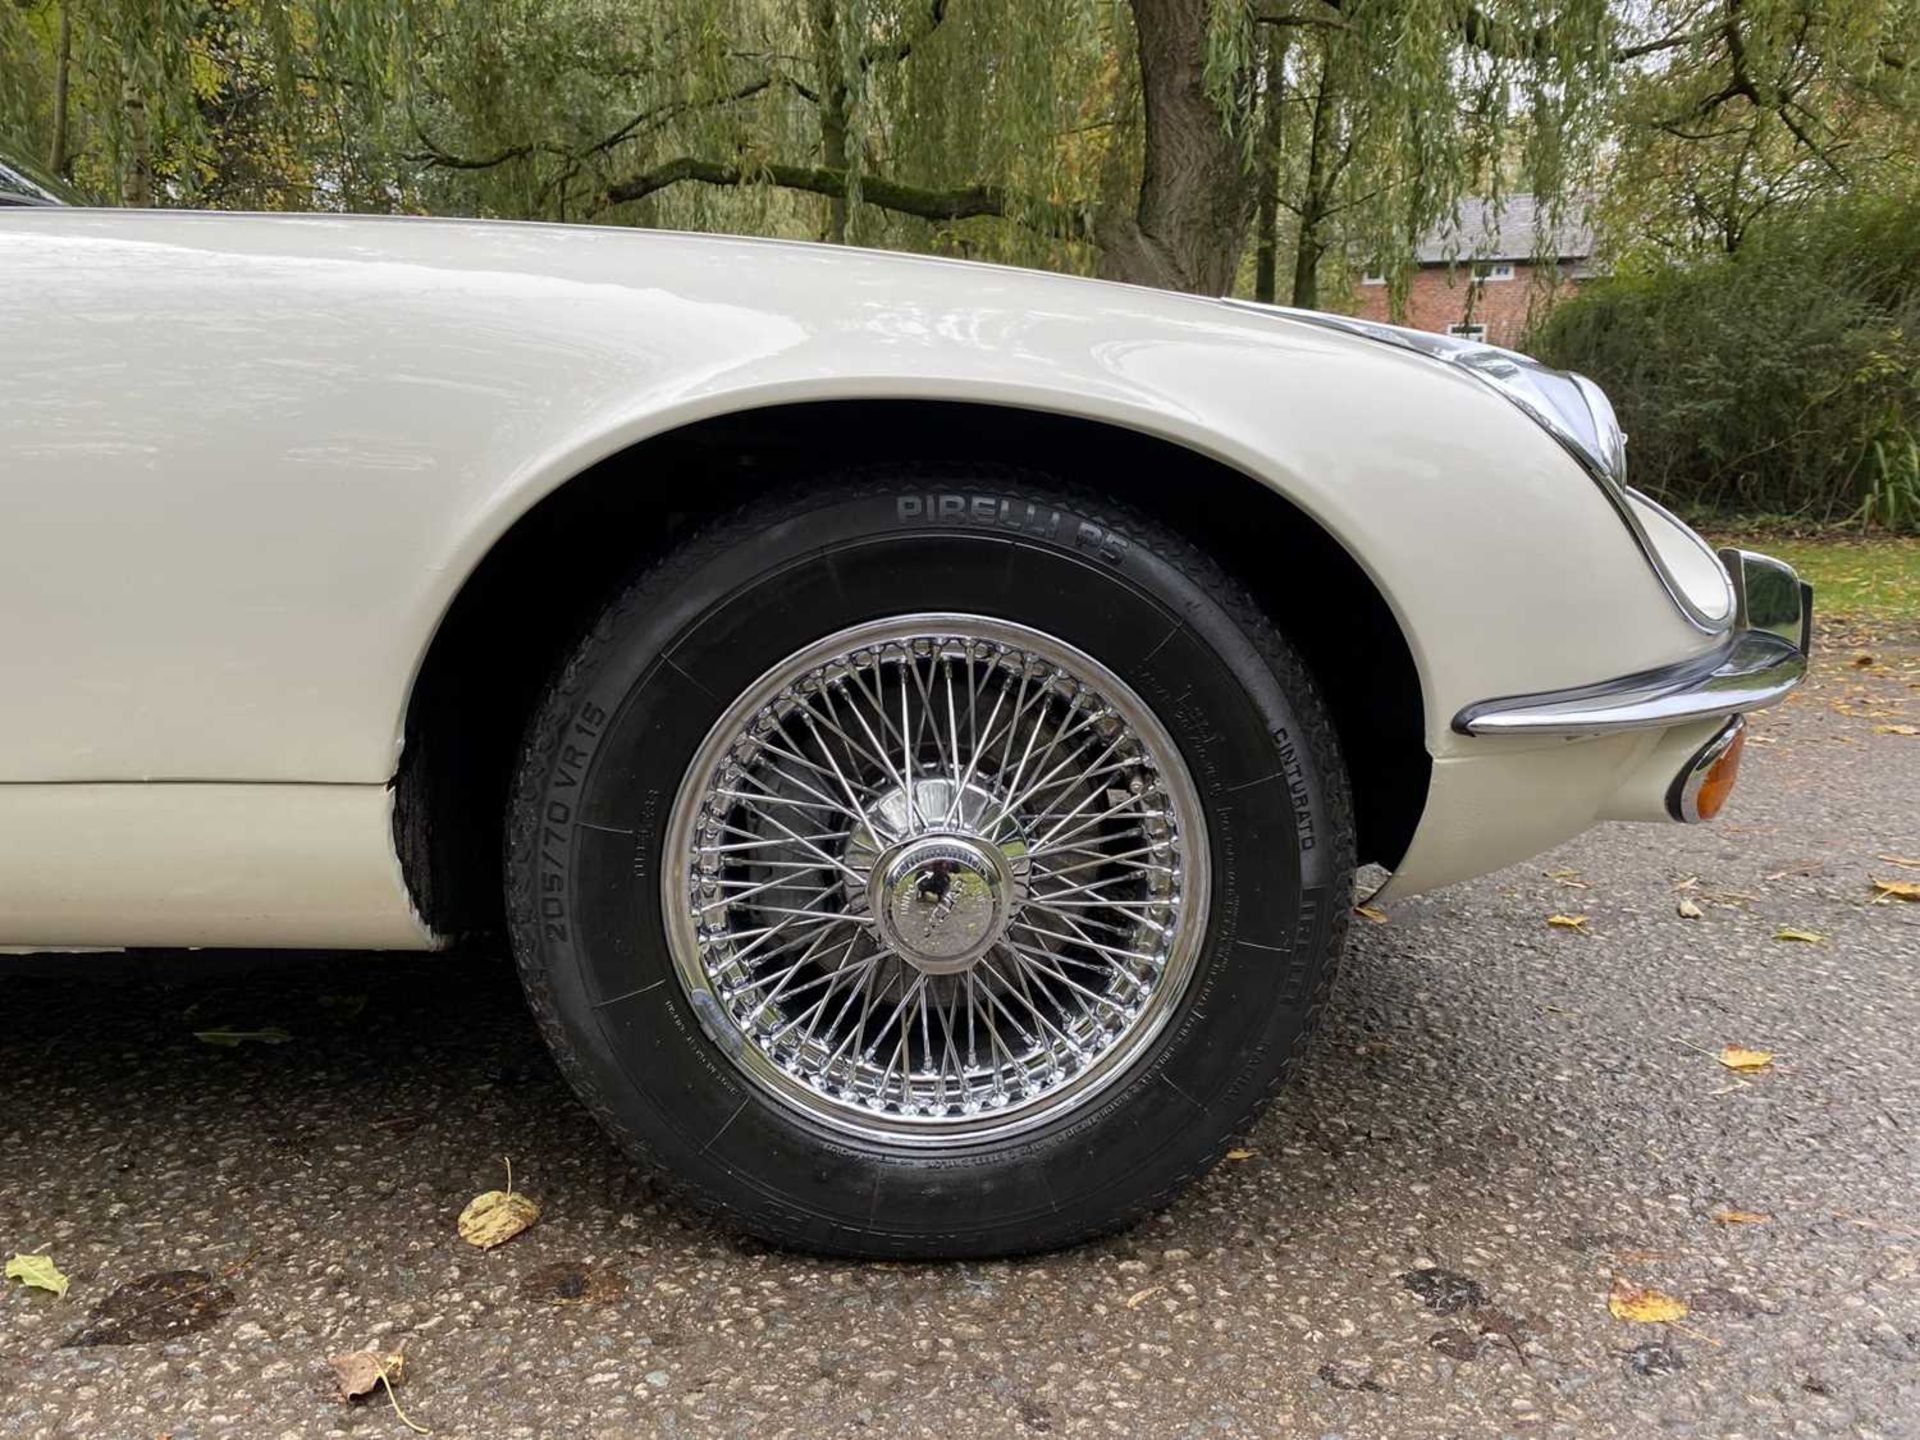 1973 Jaguar E-Type V12 Roadster As seen in Only Fools and Horses - Image 86 of 105